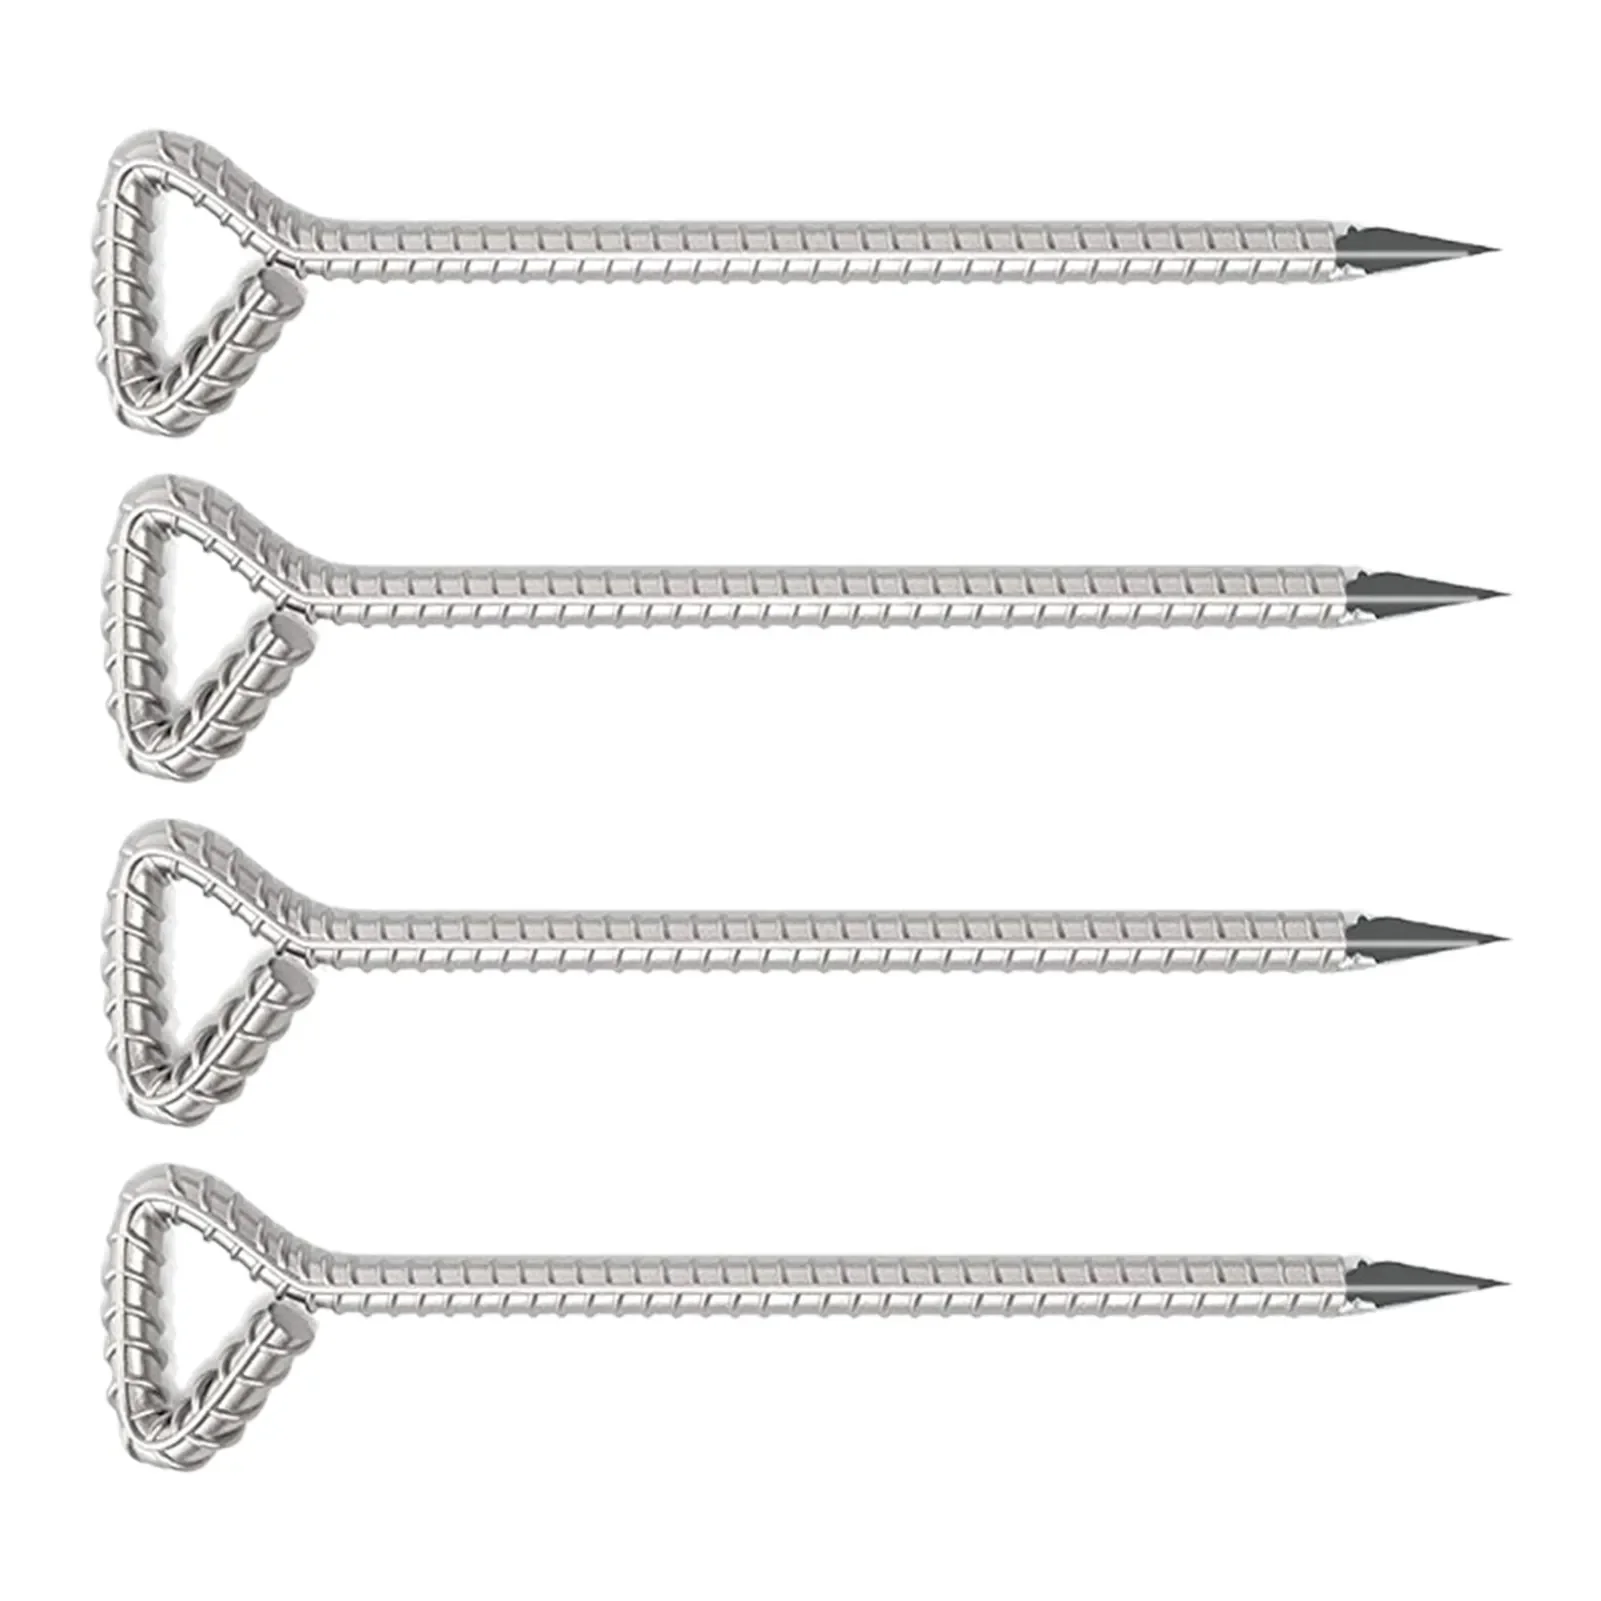 

Duty Metal Ground Anchors Set Of 4 Galvanized Steel Tent Pegs Spikes Heavy Duty With Rope Hook 4 Pack Inflexible Steel